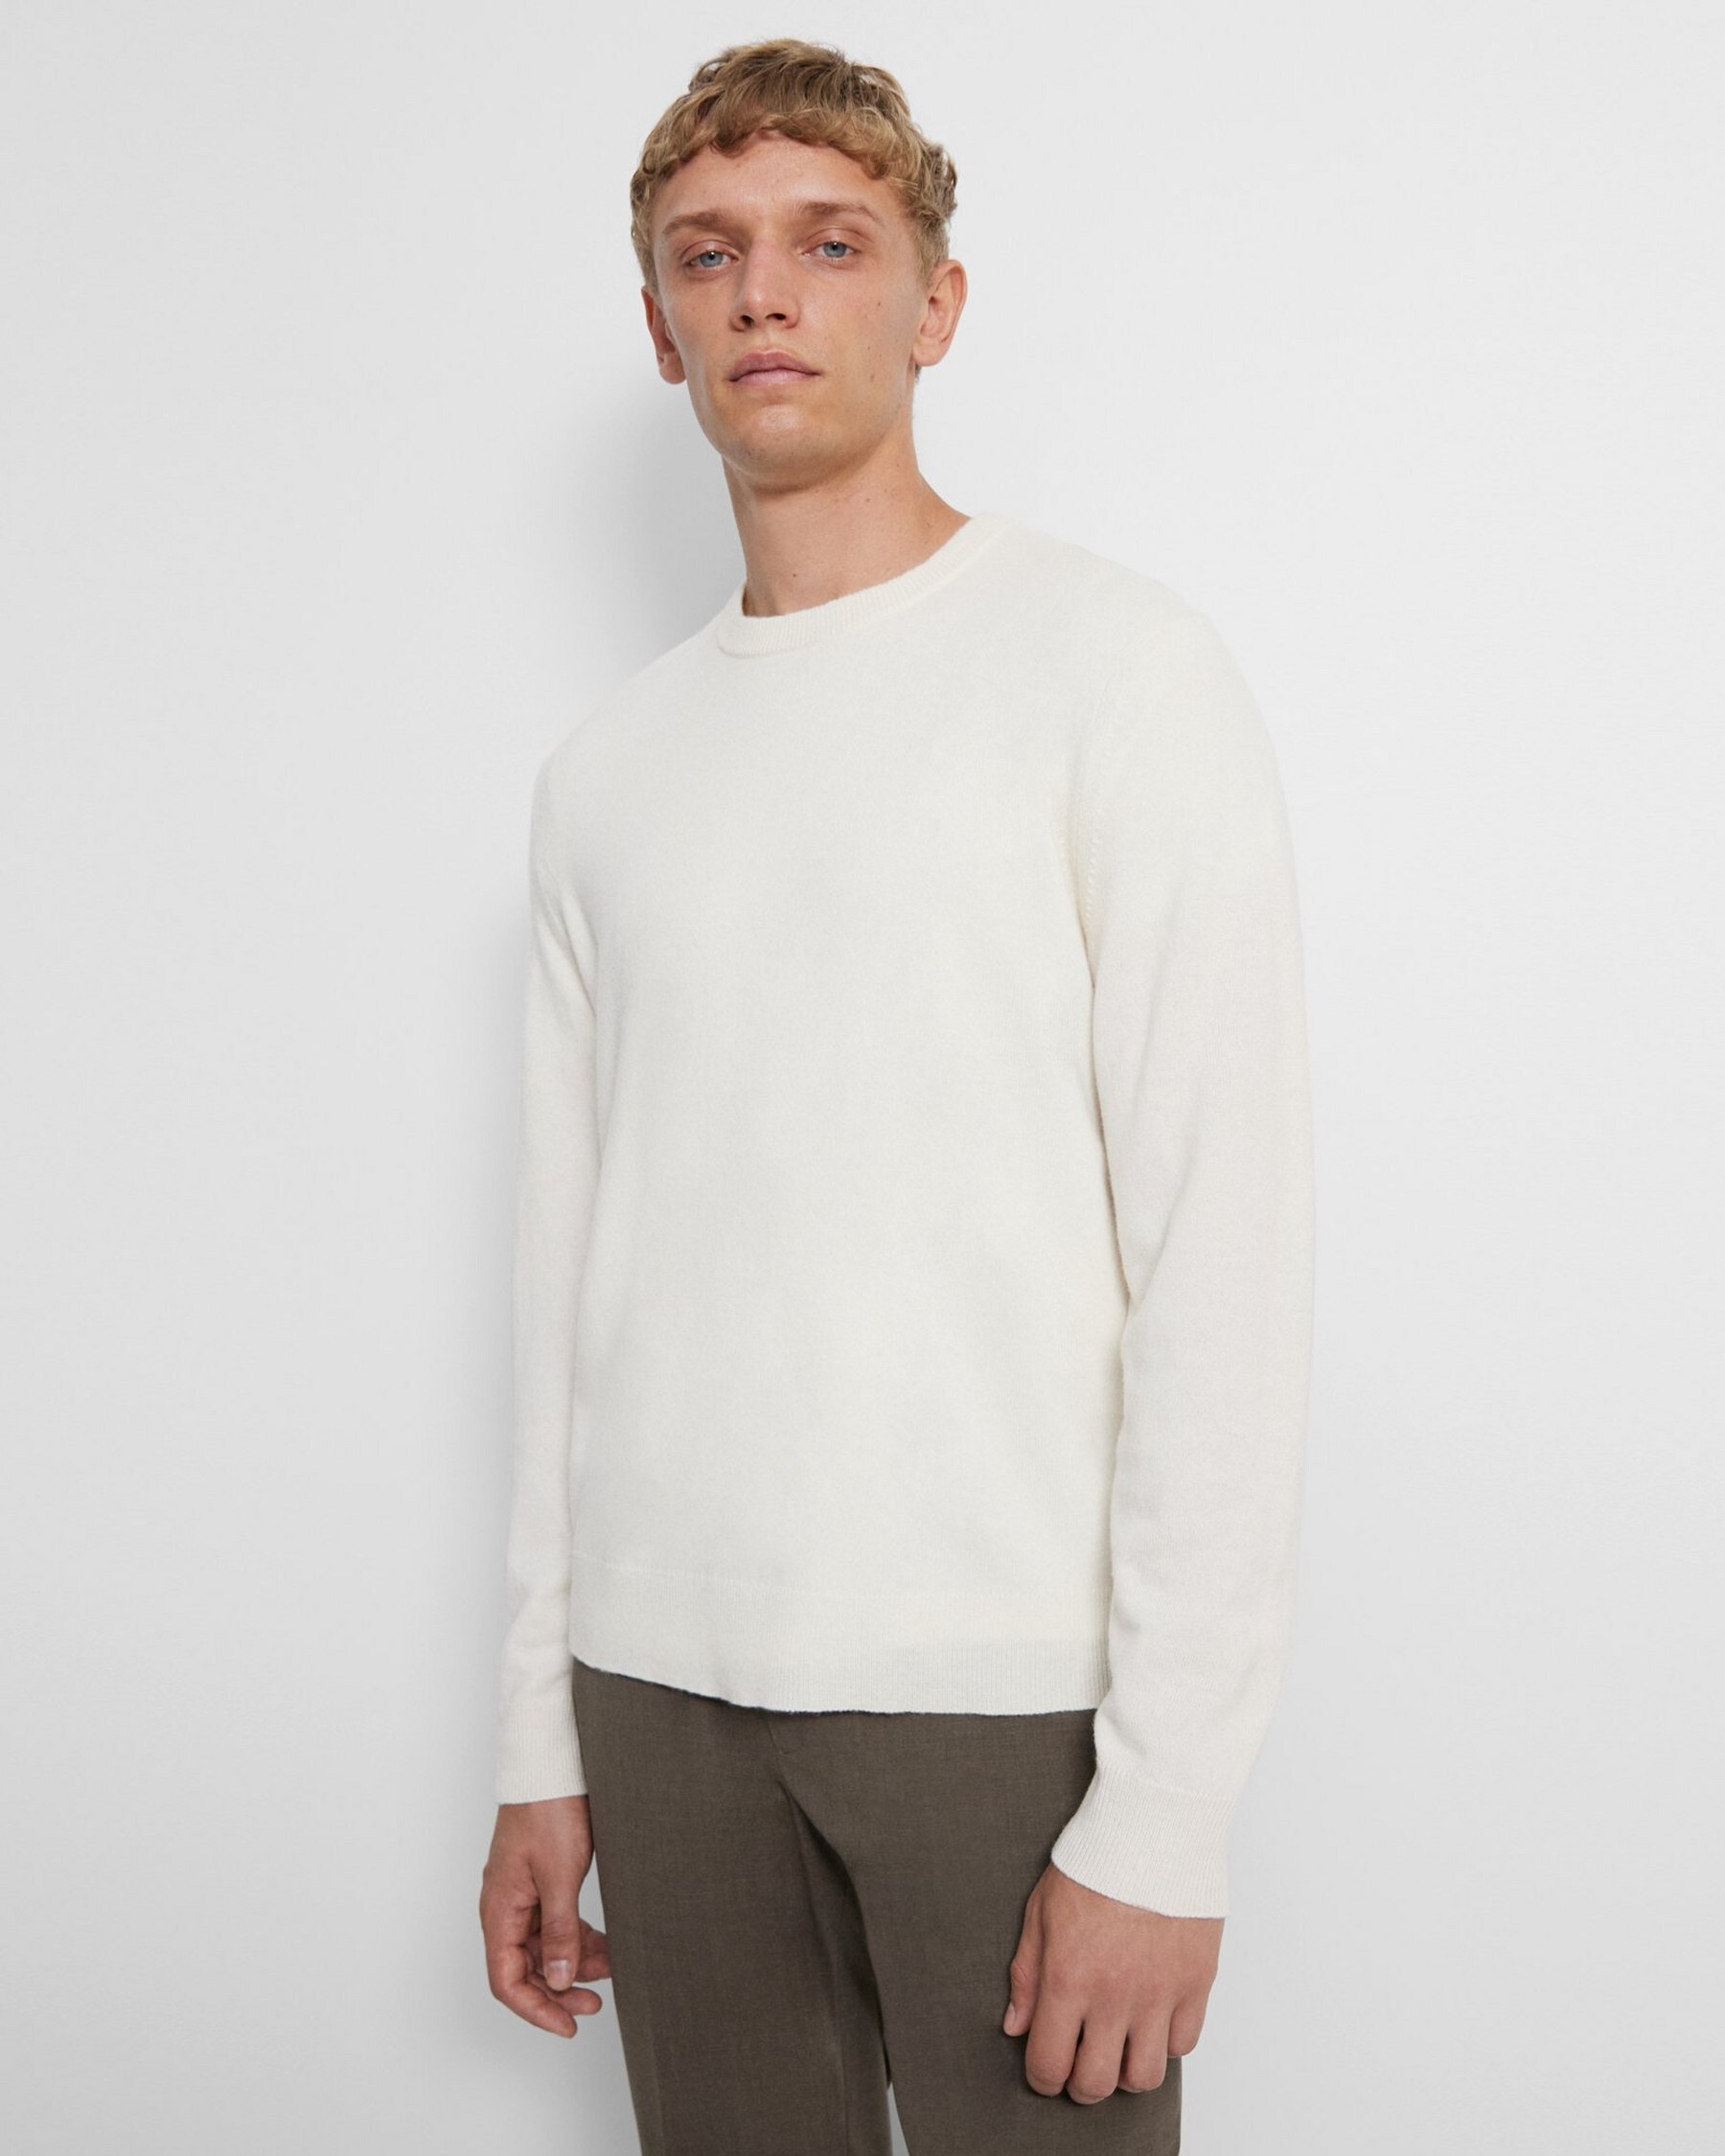 Theory Hilles Crewneck Sweater in Cashmere